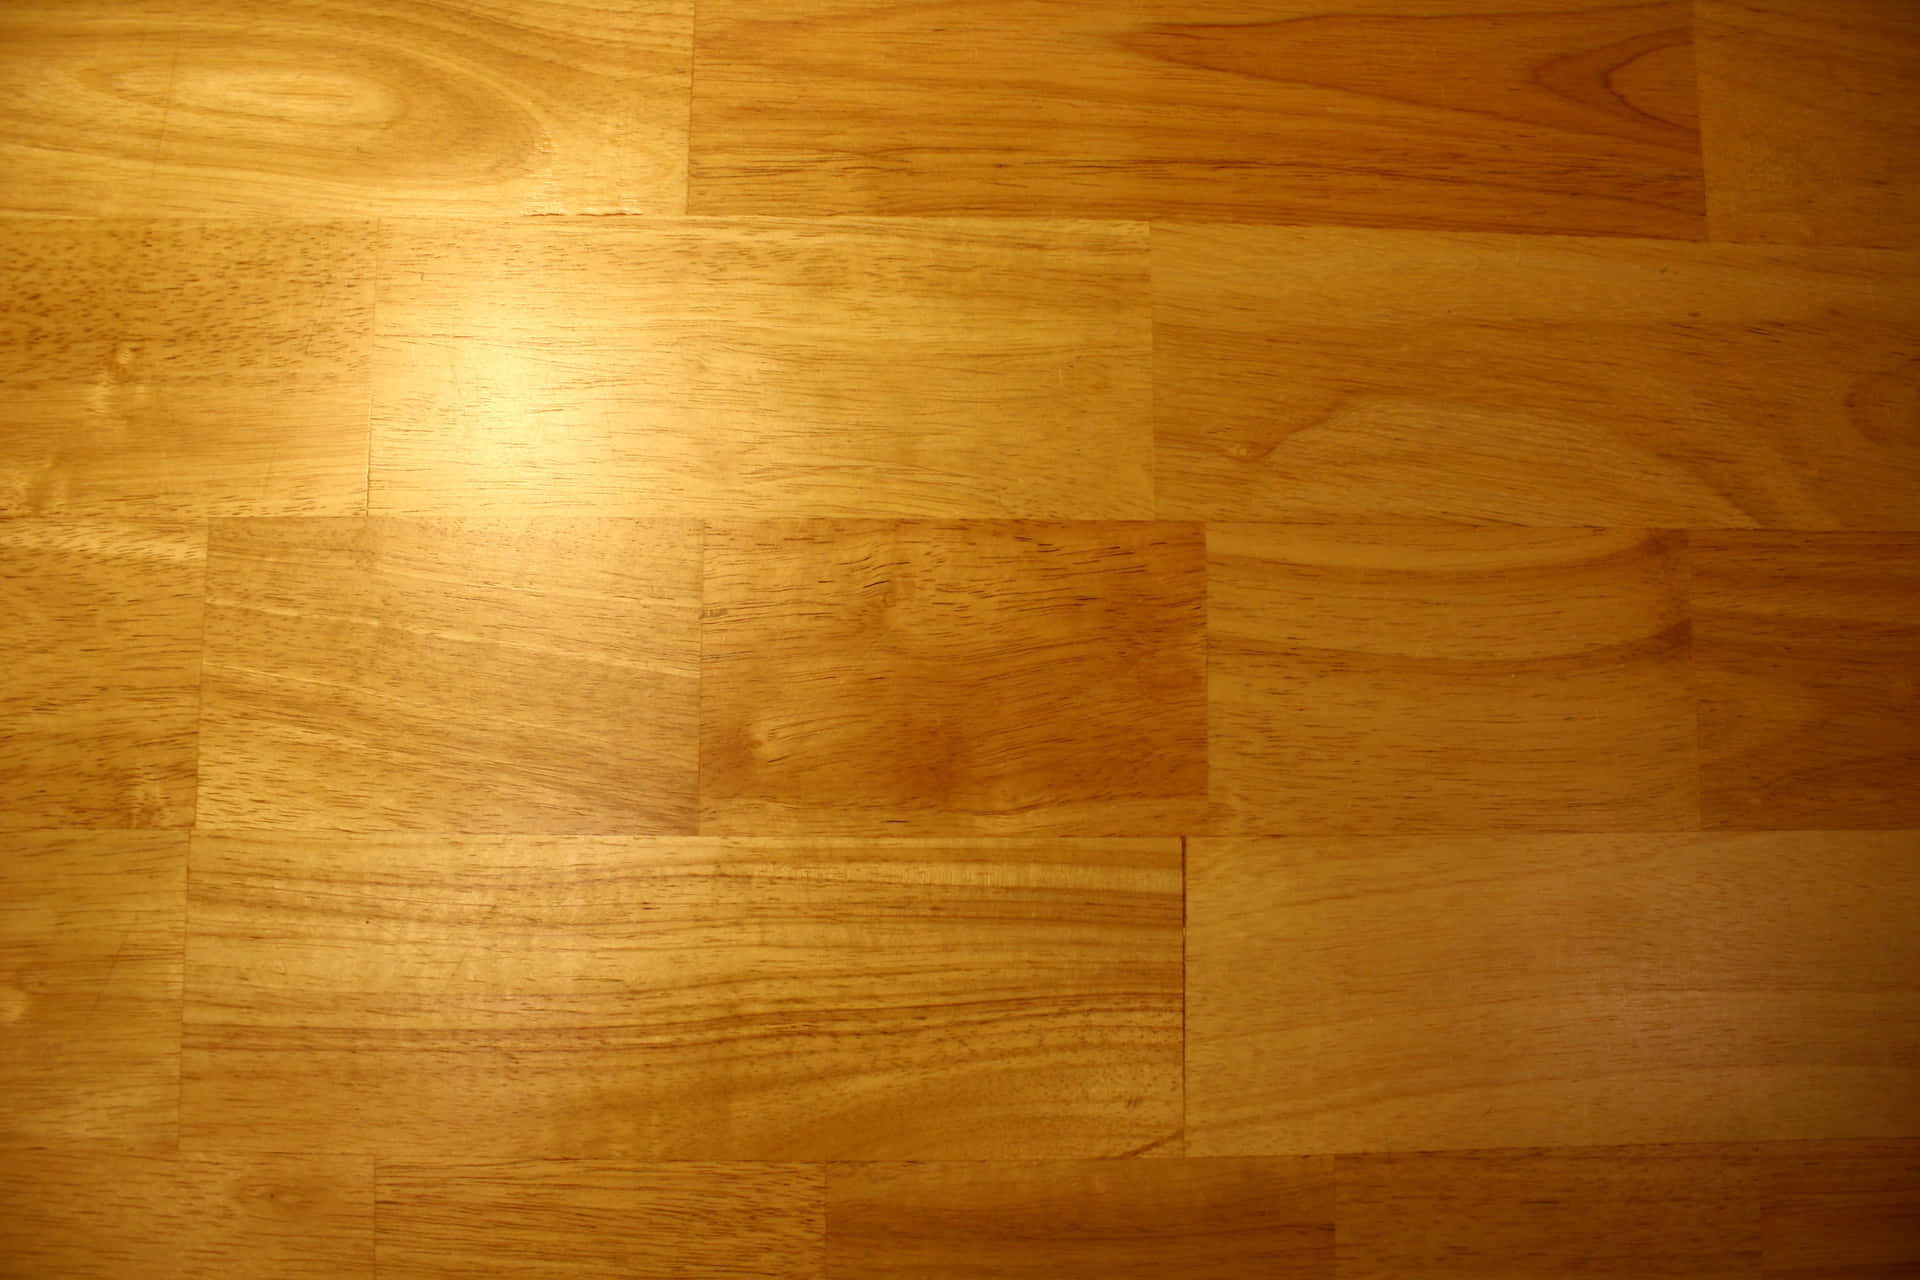 A Gorgeous Wood Floor that Brings Elegance to Any Home